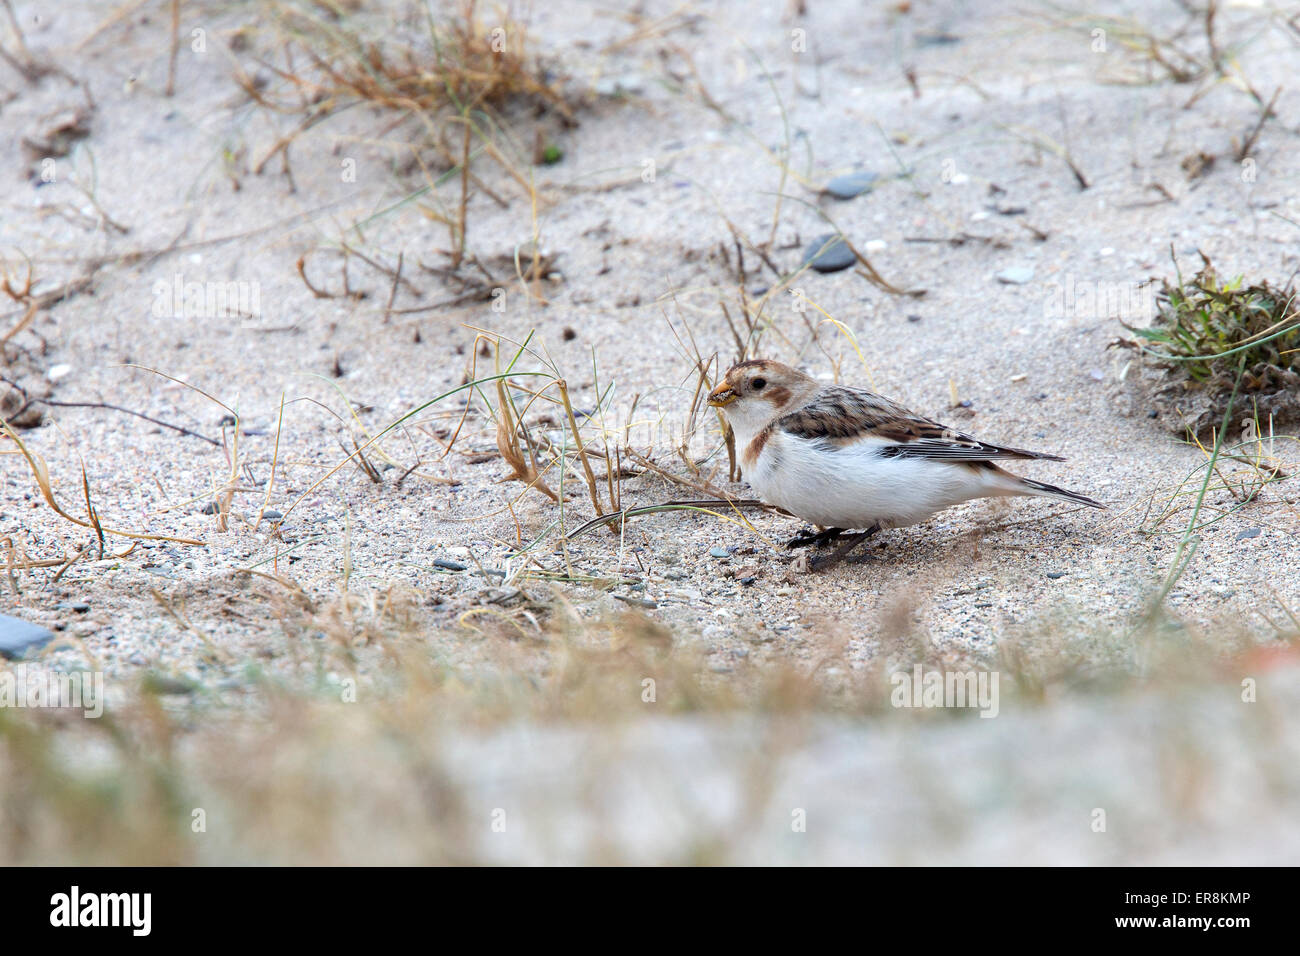 Snow Bunting, male in the sand dunes at St Gothian LNR, Gwithian, Cornwall, England, UK. Stock Photo